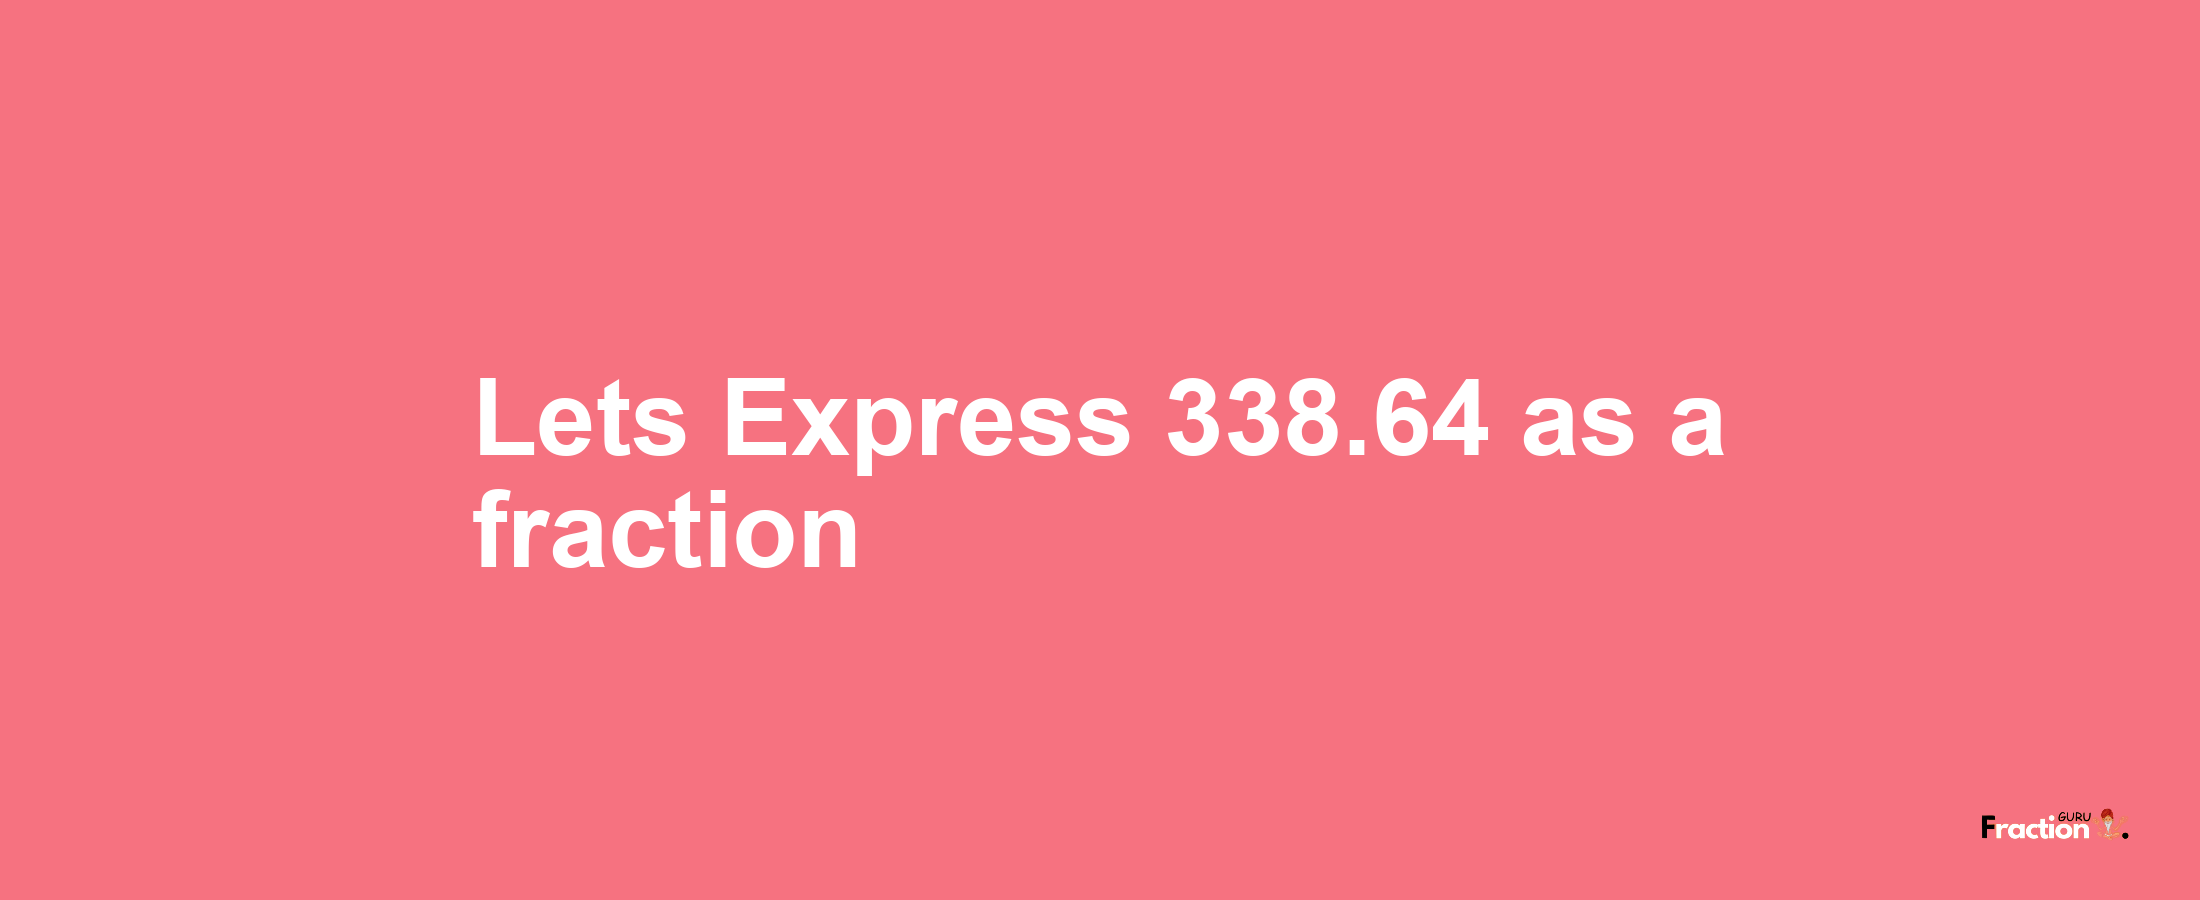 Lets Express 338.64 as afraction